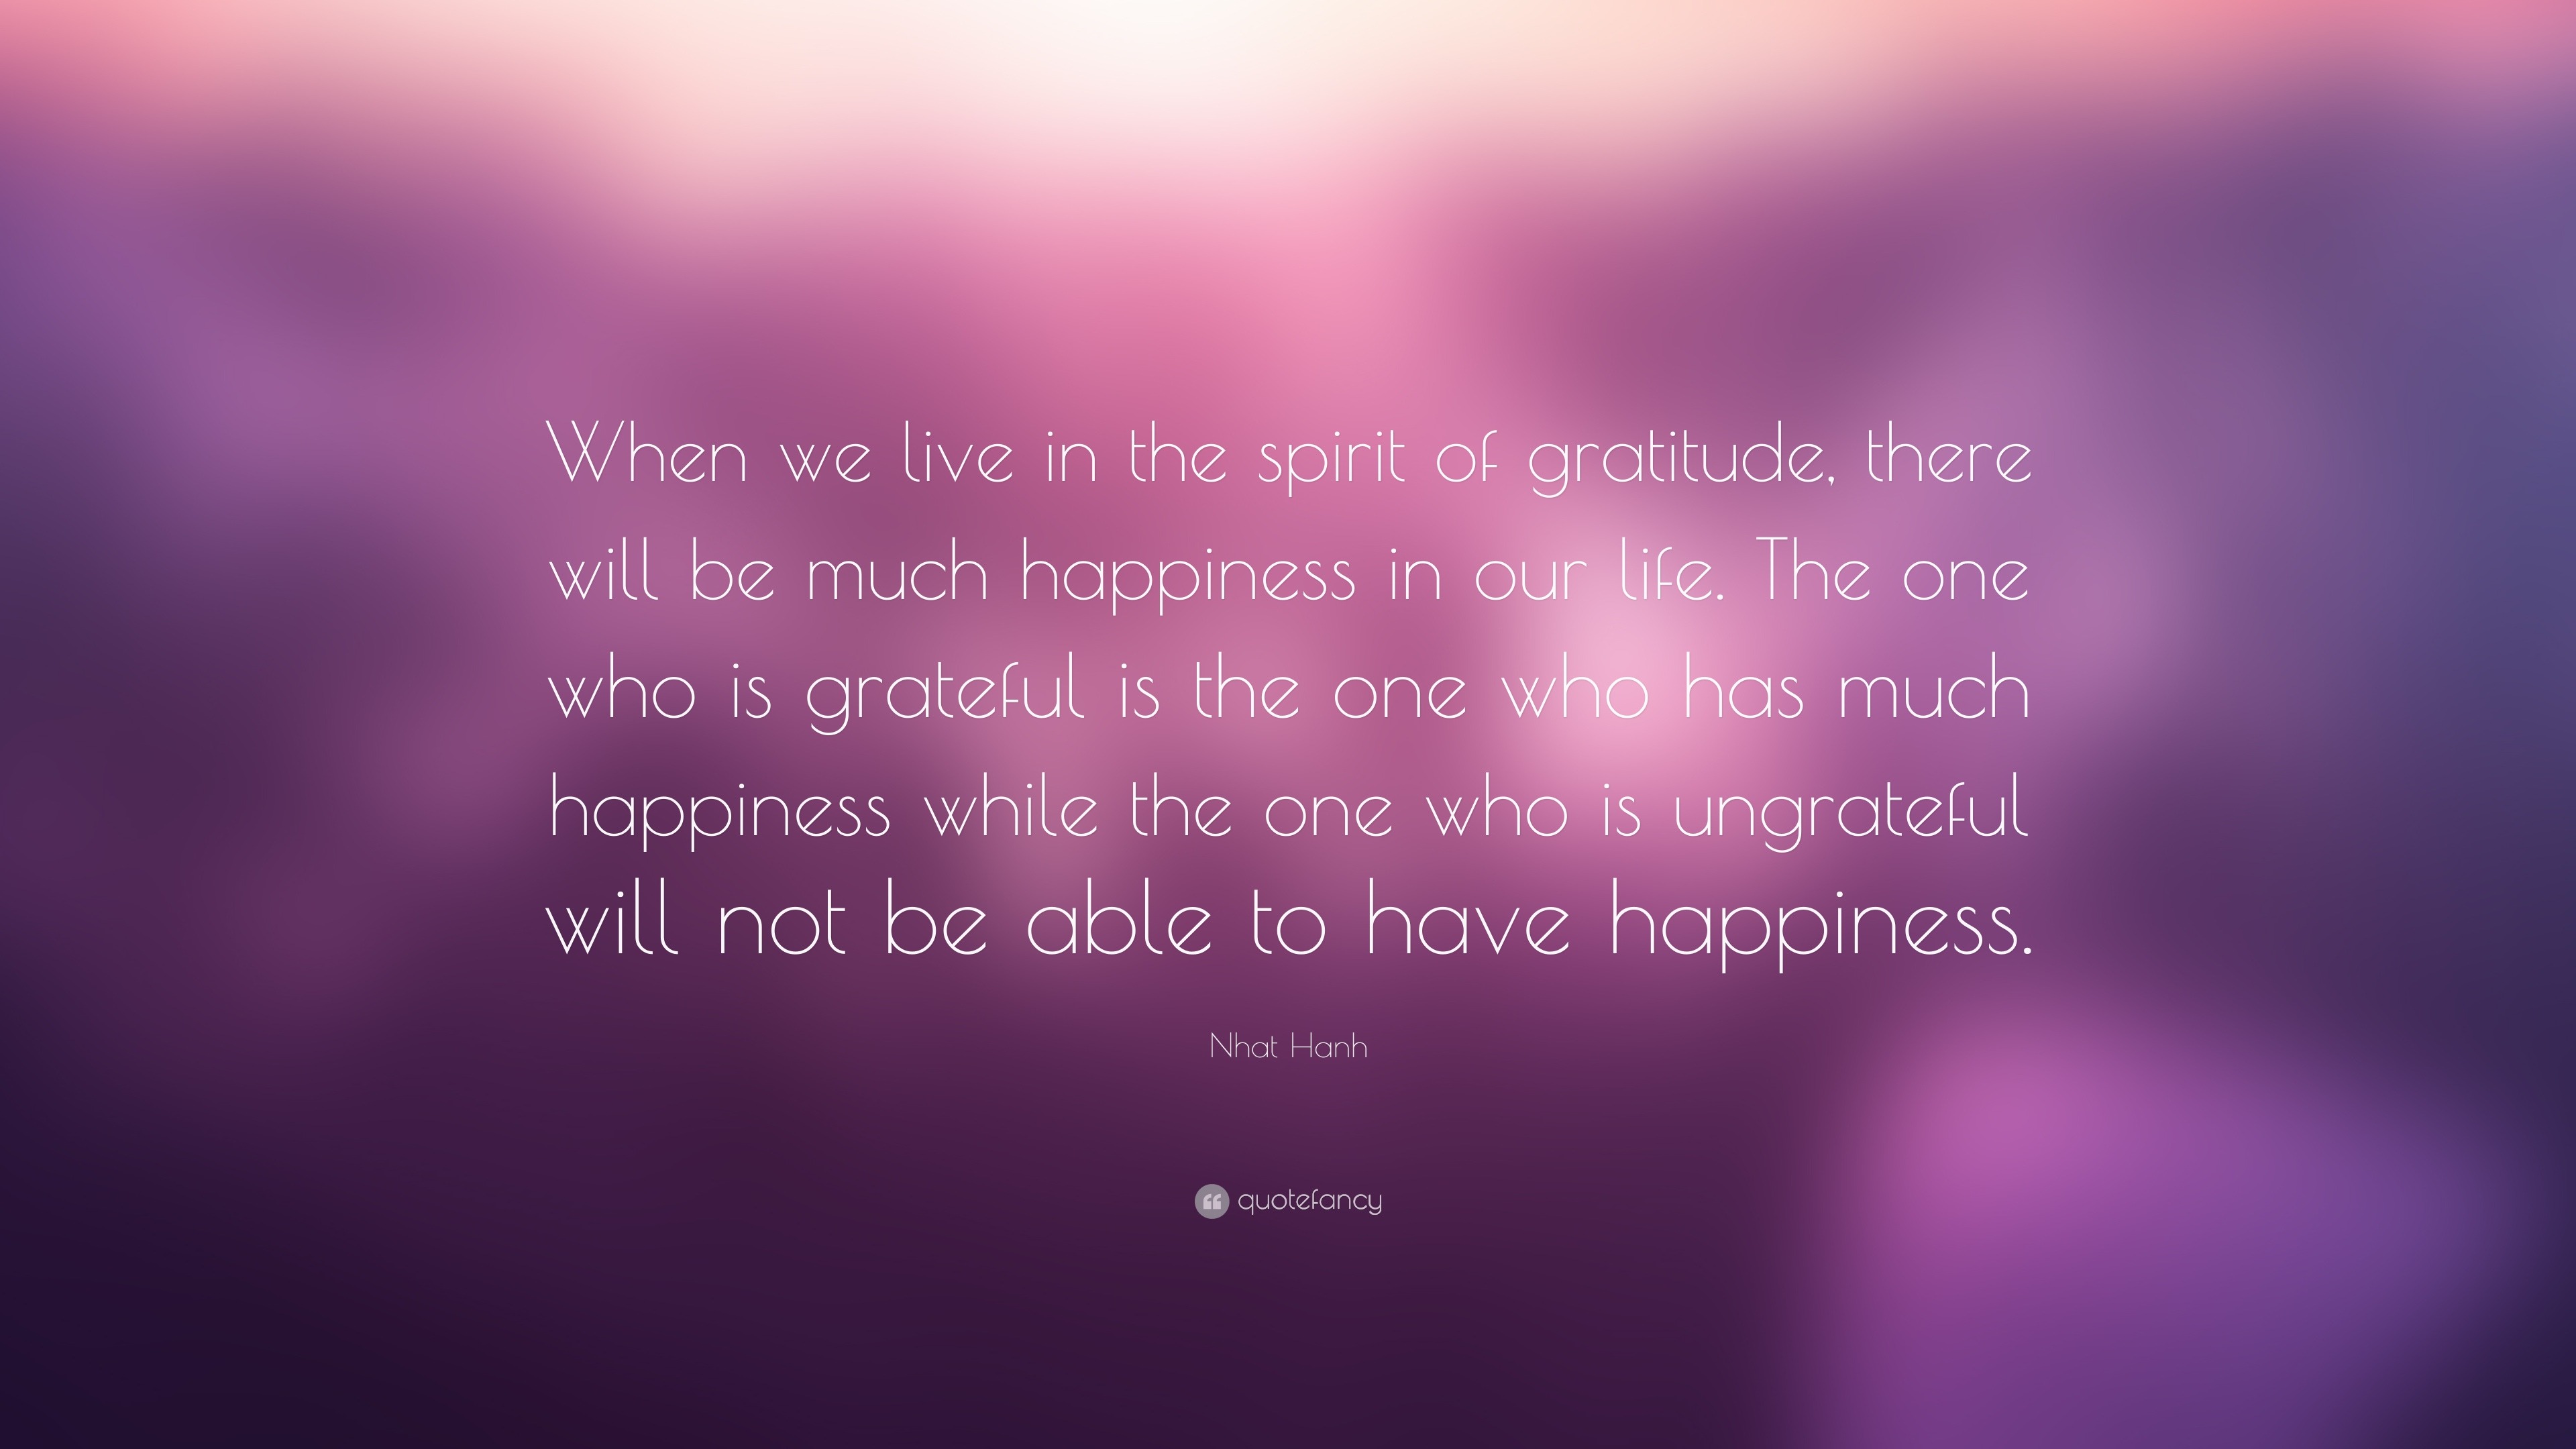 Nhat Hanh Quote: “When we live in the spirit of gratitude, there will ...